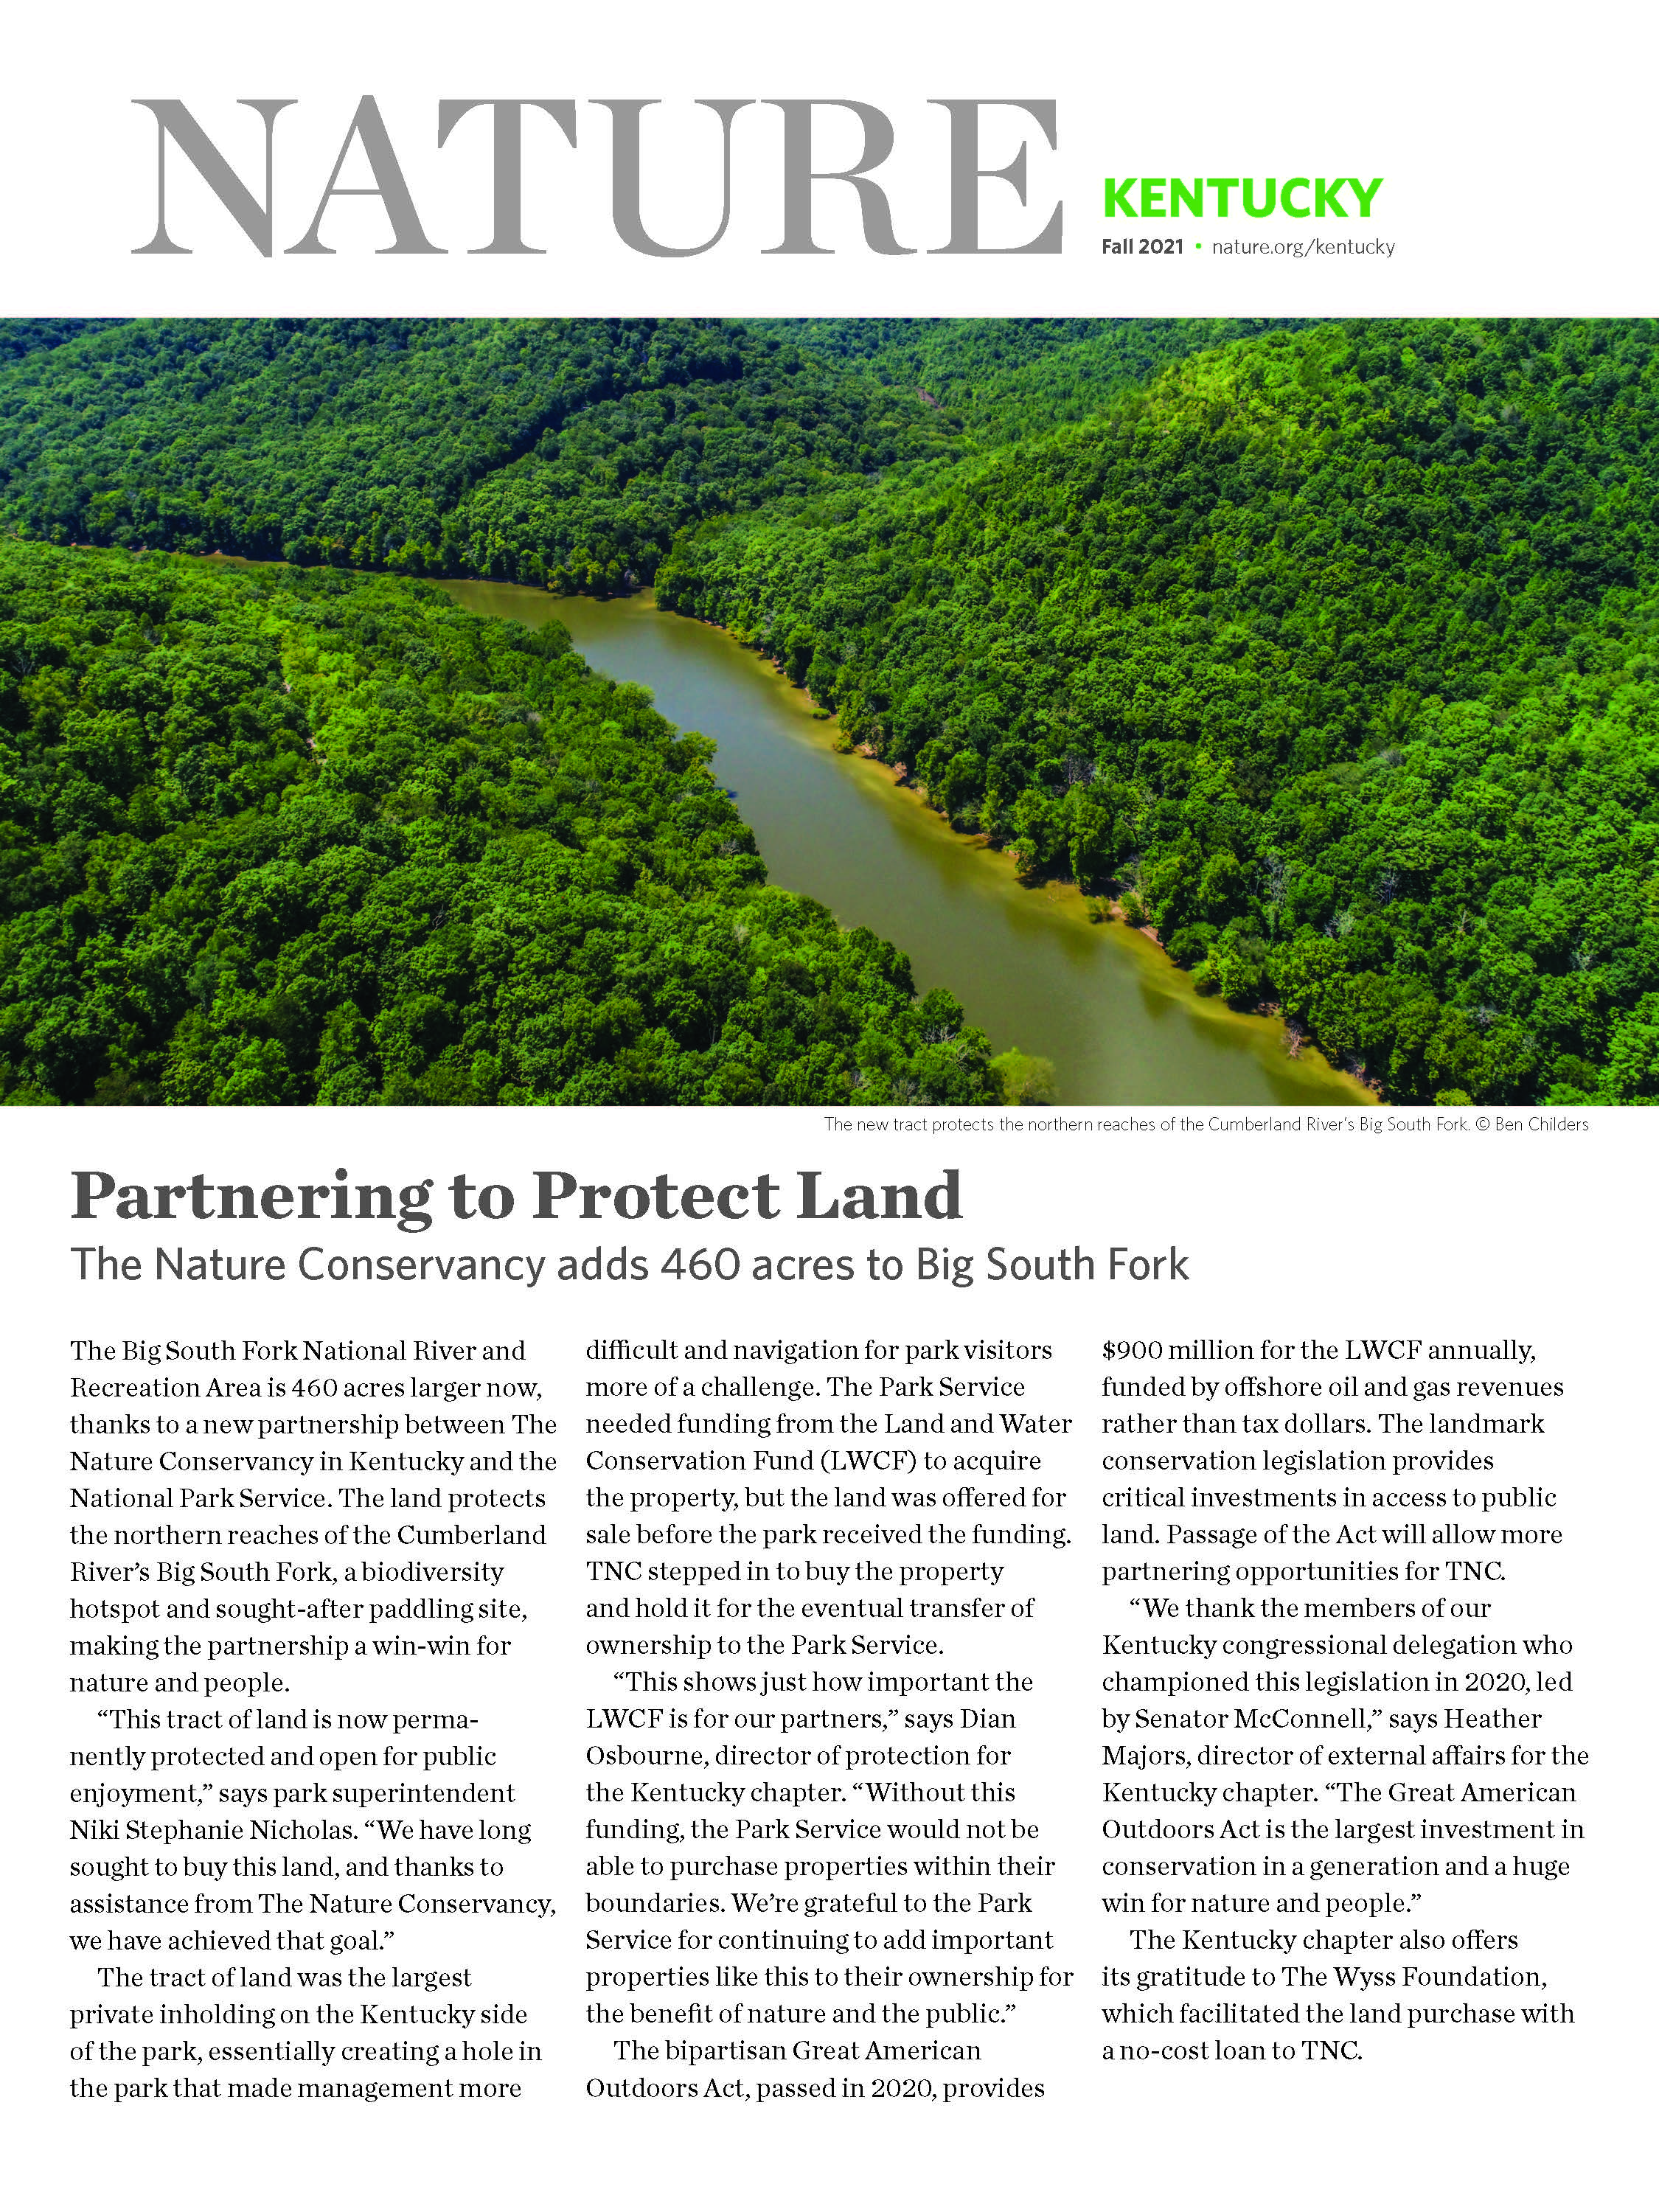 Magazine insert with photo of forest and river at top.